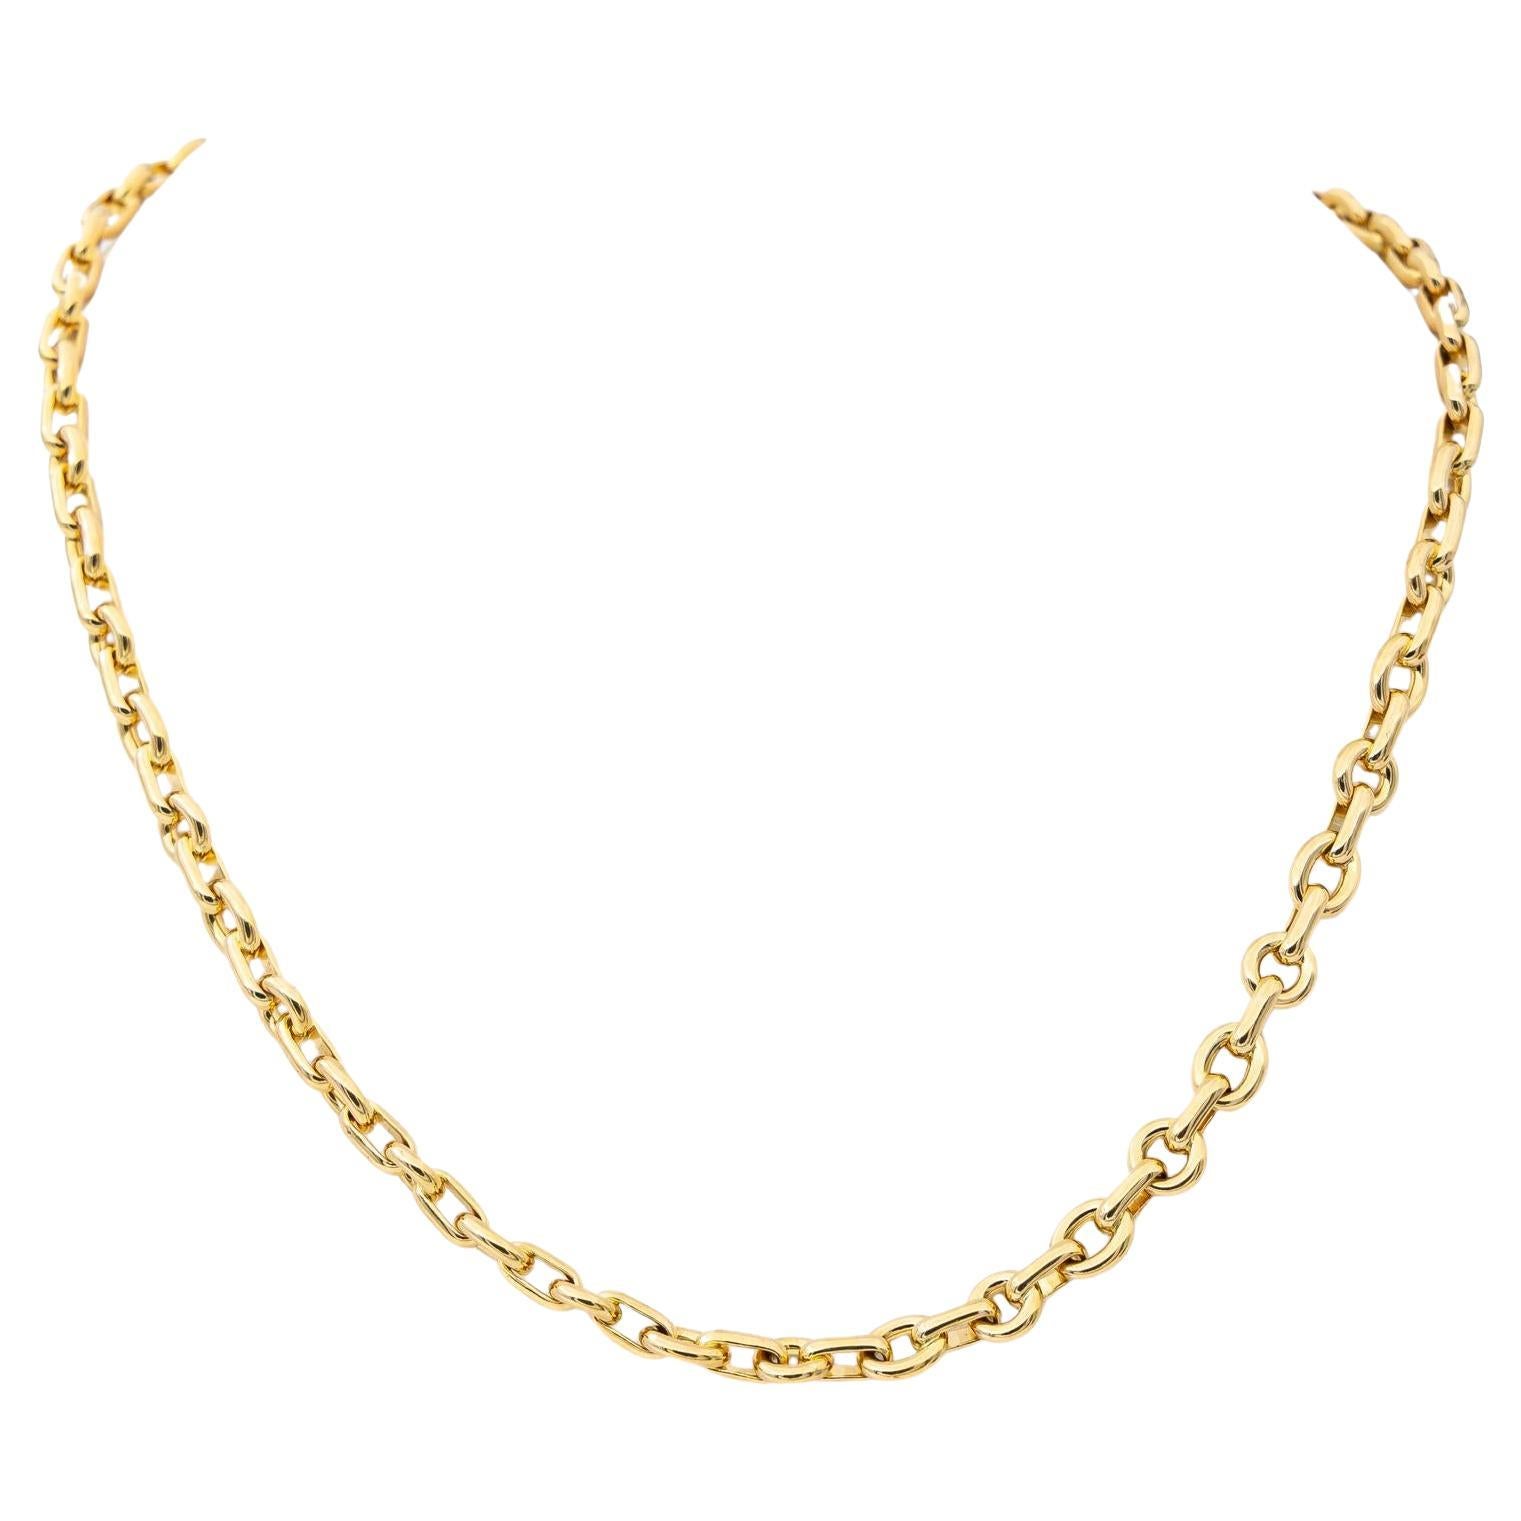 Chaumet Chain Necklace Yellow Gold